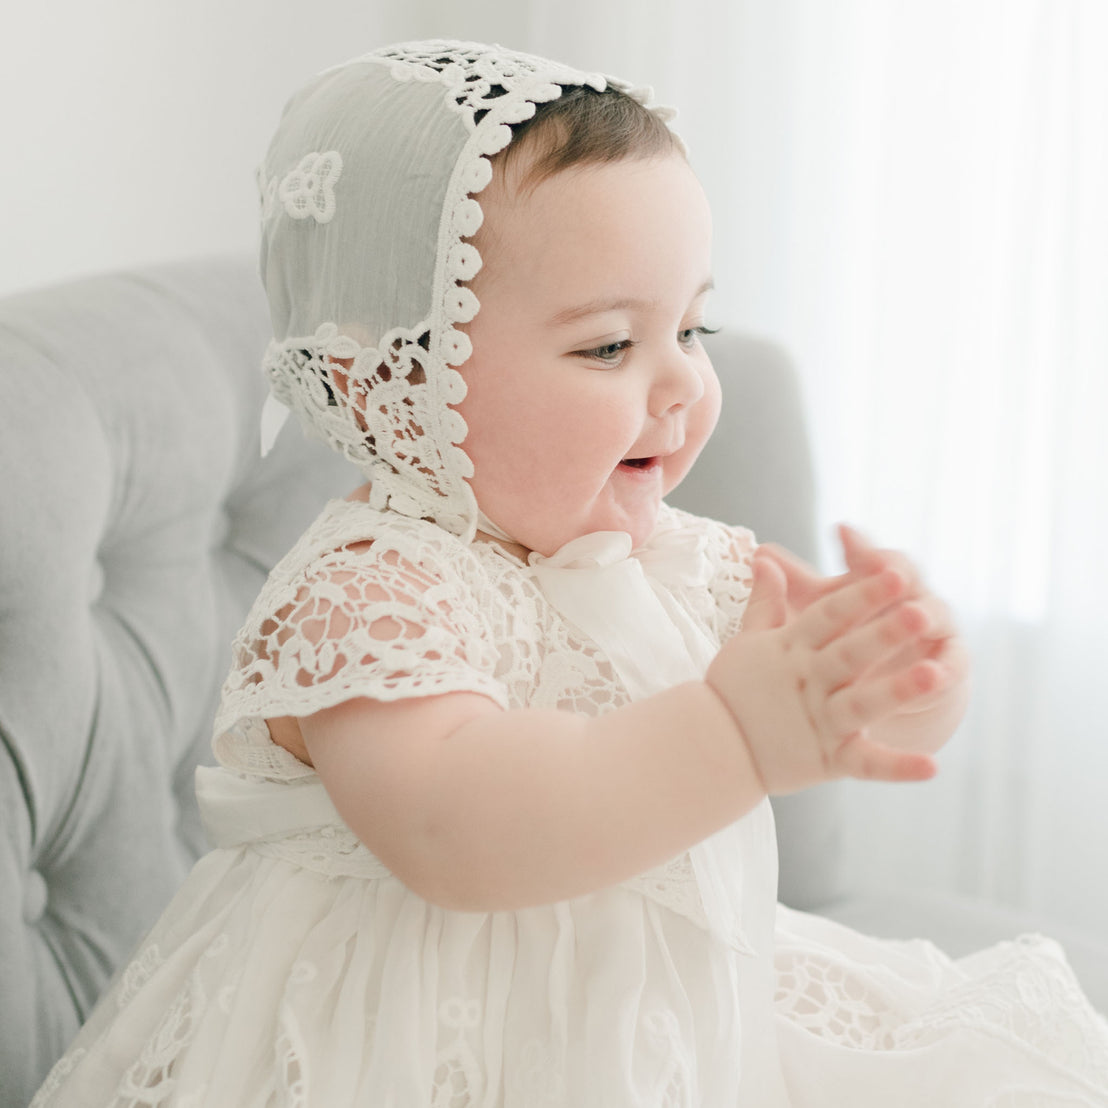 A cheerful baby in the Grace Christening Gown & Bonnet claps hands joyfully, with a bright, light-filled background.